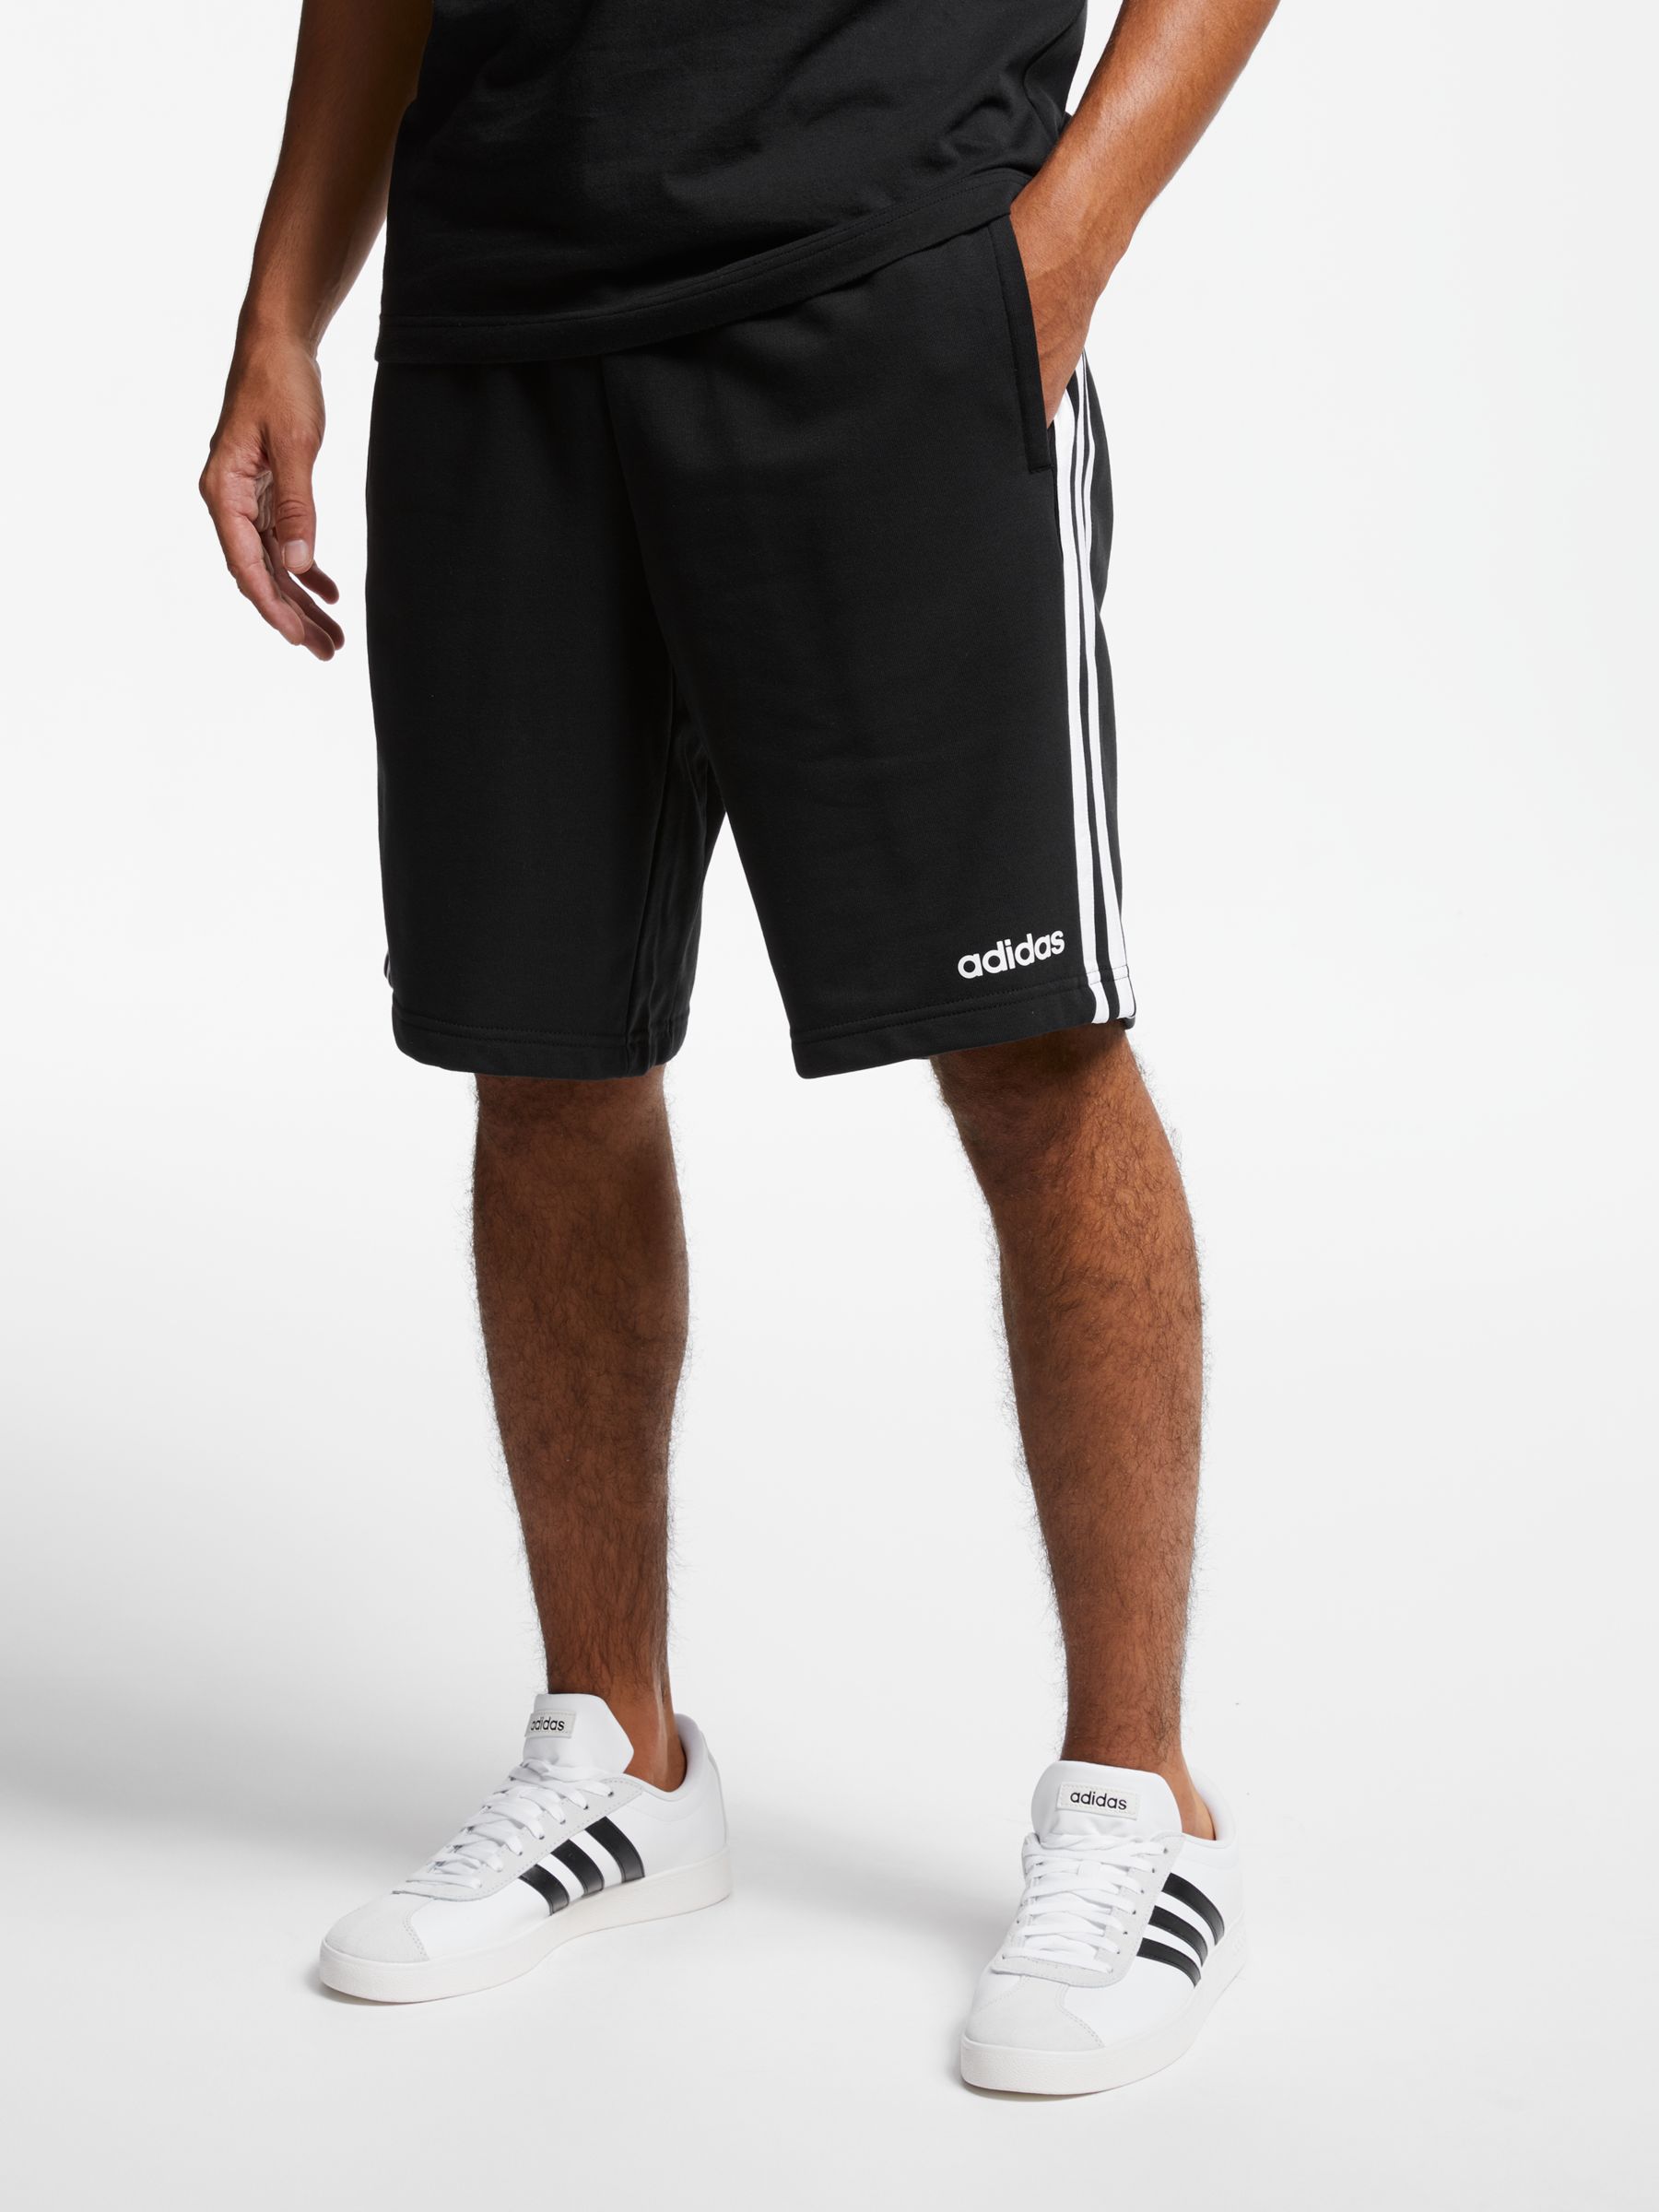 adidas Essentials 3-Stripes French Terry Shorts, Black at John Lewis ...